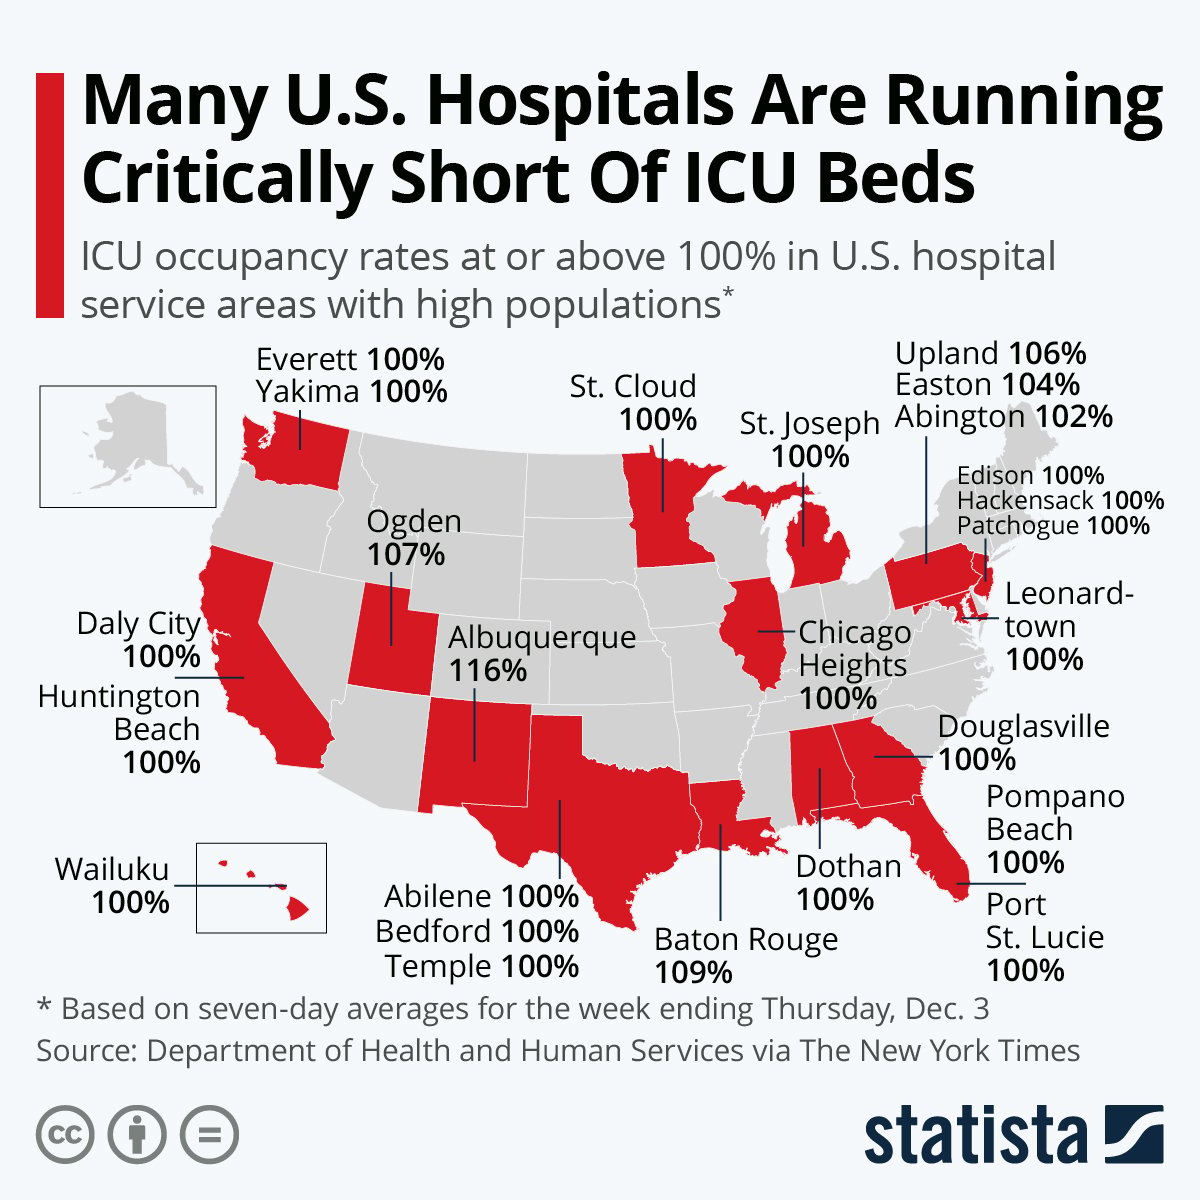 US Hospitals Running Out of ICU Beds